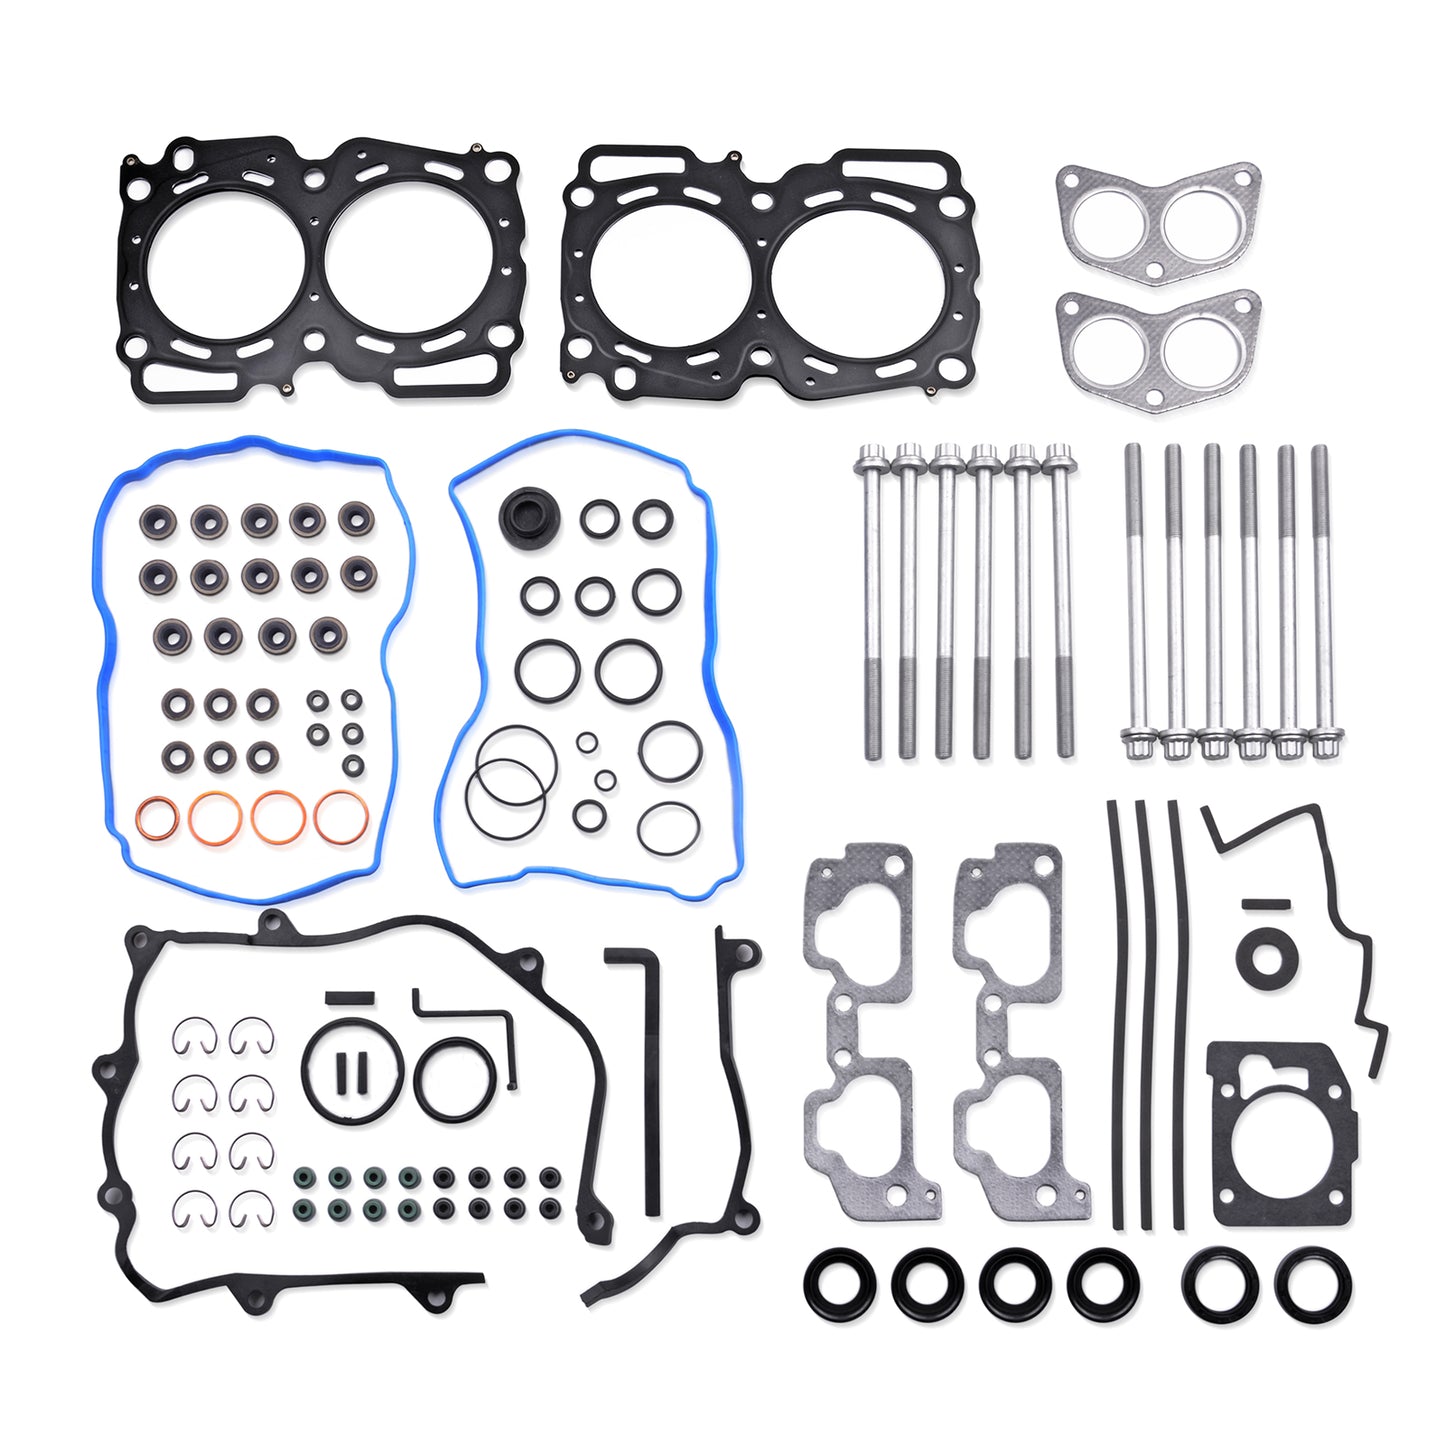 Engine Cylinder Head Gasket Set with Bolts Compatible with for Subaru Baja 2003-2006 for Subaru Forester 1999-2010